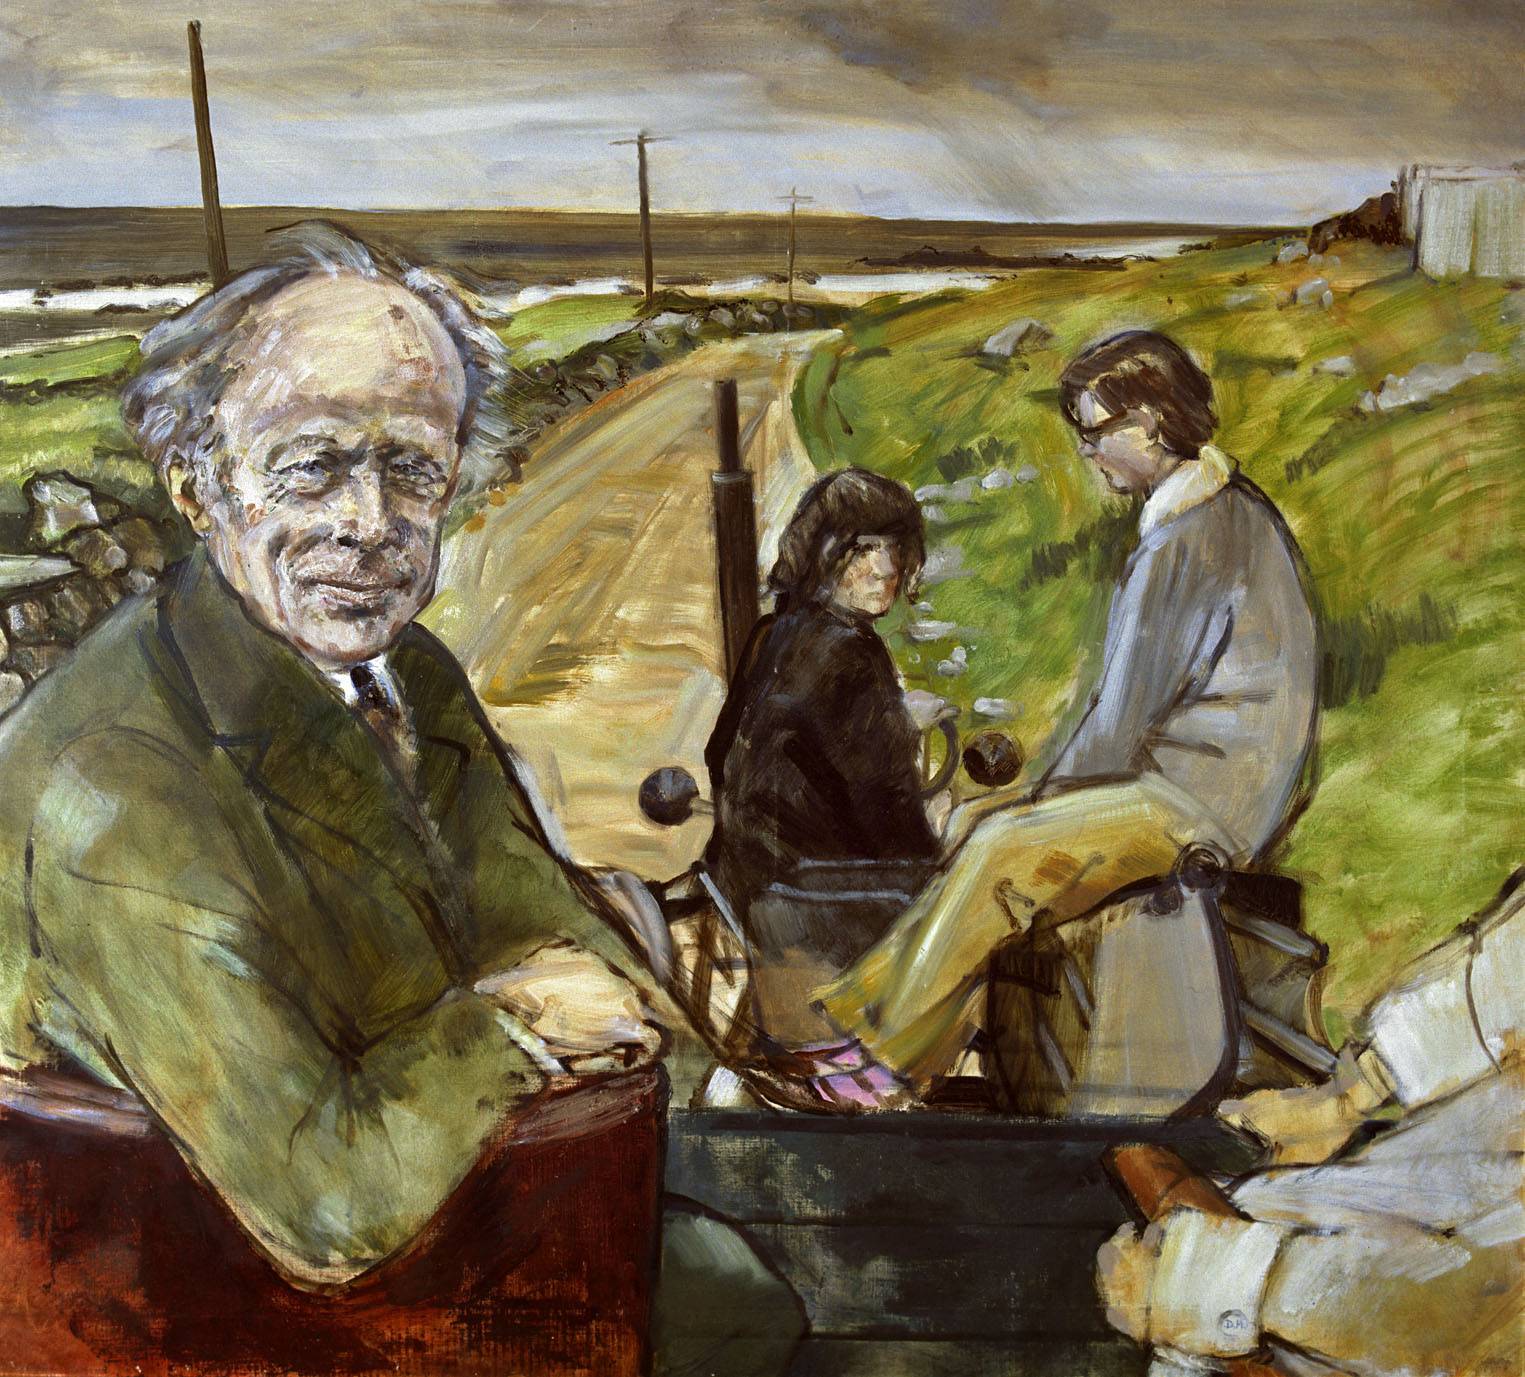 Erskine Childers, President of Ireland, by Derek Hill, 1974. The National Museum. Oil on canvas. Erskine and Rita Childers stayed at St Columb's from where they visited Tory Island, touring it on the only mechanised form of trnasport: a tractor. Hill finished this picture, showing him visiting the local people he loved, after the president's death. Derek Hill Foundation. 